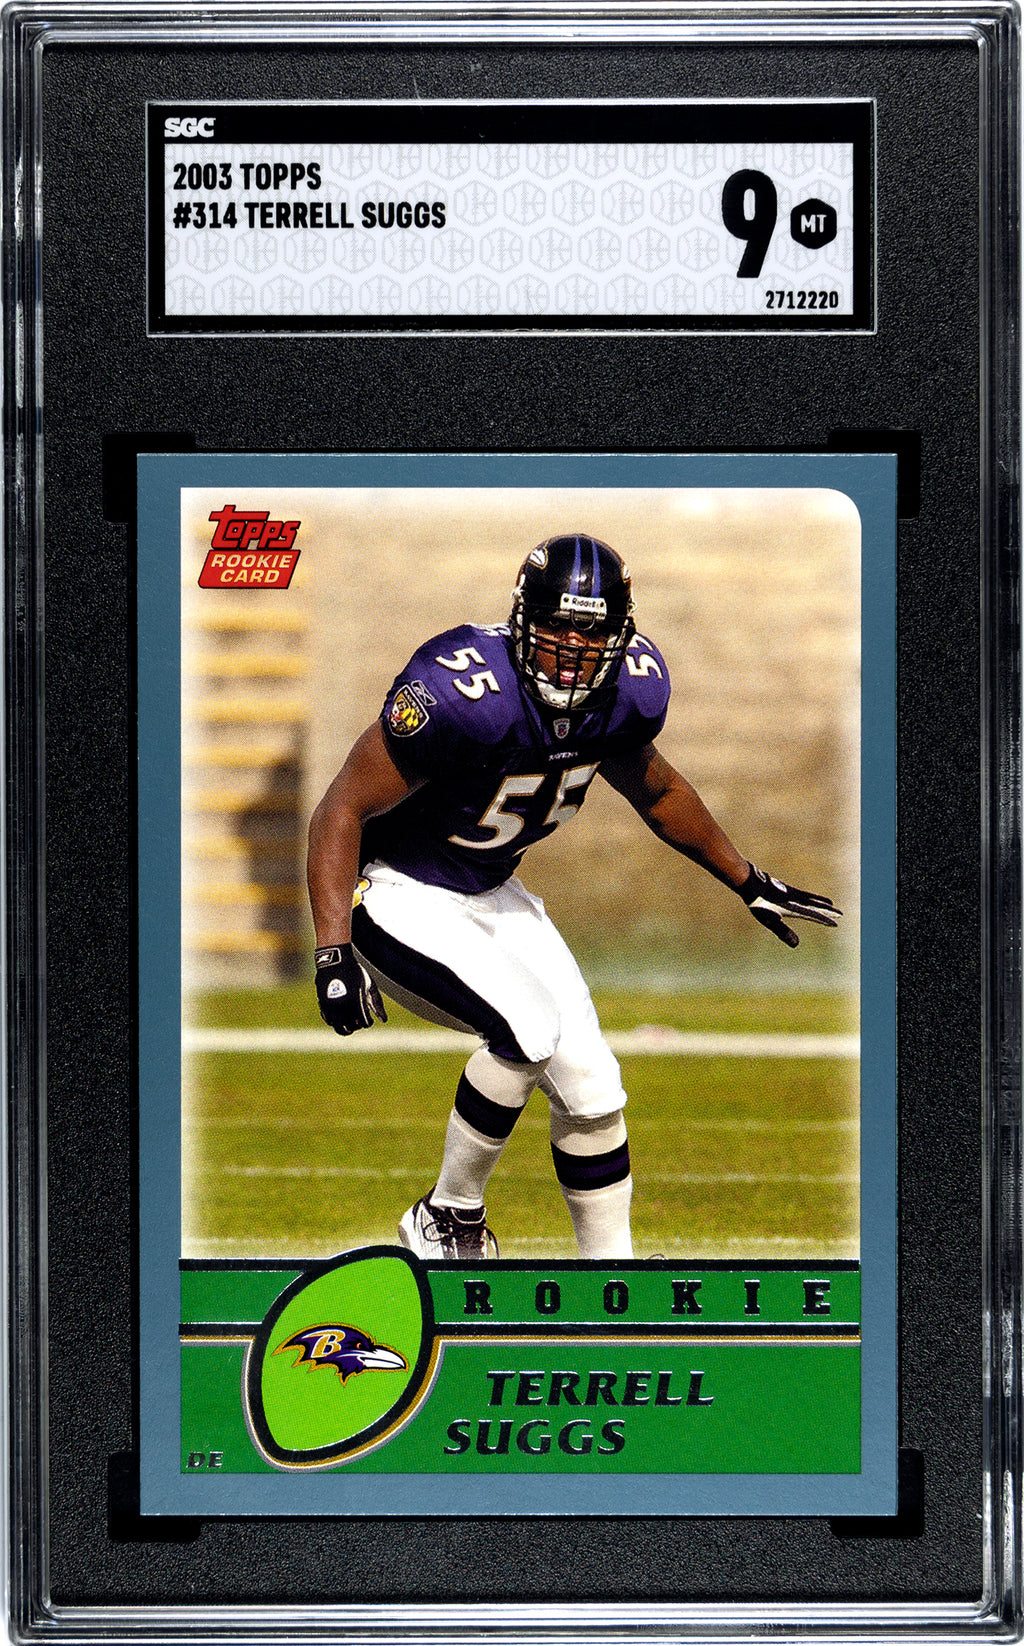 SGC 9 Terrell Suggs 2003 Topps Rookie #314 Valuable Collectible Sports Card